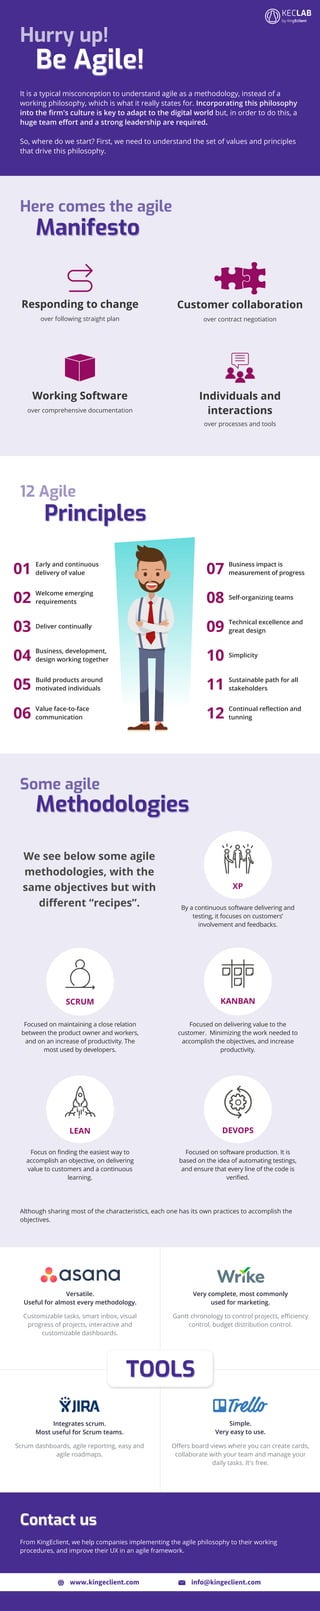 Hurry up!
ManifestoManifesto
Here comes the agile
MethodologiesMethodologies
Some agile
Be Agile!Be Agile!
It is a typical misconception to understand agile as a methodology, instead of a
working philosophy, which is what it really states for. Incorporating this philosophy
into the ﬁrm's culture is key to adapt to the digital world but, in order to do this, a
huge team eﬀort and a strong leadership are required.
So, where do we start? First, we need to understand the set of values and principles
that drive this philosophy.
01 Early and continuous
delivery of value
We see below some agile
methodologies, with the
same objectives but with
diﬀerent “recipes”.
Although sharing most of the characteristics, each one has its own practices to accomplish the
objectives.
From KingEclient, we help companies implementing the agile philosophy to their working
procedures, and improve their UX in an agile framework.
02 Welcome emerging
requirements
03 Deliver continually
05 Build products around
motivated individuals
06 Value face-to-face
communication
07 Business impact is
measurement of progress
08 Self-organizing teams
09 Technical excellence and
great design
10 Simplicity
11 Sustainable path for all
stakeholders
12 Continual reﬂection and
tunning
PrinciplesPrinciples
12 Agile
Gantt chronology to control projects, eﬃciency
control, budget distribution control.
Very complete, most commonly
used for marketing.
Oﬀers board views where you can create cards,
collaborate with your team and manage your
daily tasks. It's free.
Simple.
Very easy to use.
Versatile.
Useful for almost every methodology.
Customizable tasks, smart inbox, visual
progress of projects, interactive and
customizable dashboards.
TOOLSTOOLS
04 Business, development,
design working together
Focus on ﬁnding the easiest way to
accomplish an objective, on delivering
value to customers and a continuous
learning.
LEAN
Focused on delivering value to the
customer. Minimizing the work needed to
accomplish the objectives, and increase
productivity.
KANBAN
Focused on maintaining a close relation
between the product owner and workers,
and on an increase of productivity. The
most used by developers.
SCRUM
Focused on software production. It is
based on the idea of automating testings,
and ensure that every line of the code is
veriﬁed.
DEVOPS
By a continuous software delivering and
testing, it focuses on customers’
involvement and feedbacks.
XP
Responding to change
over following straight plan
Working Software
over comprehensive documentation
Individuals and
interactions
over processes and tools
Customer collaboration
over contract negotiation
Contact usContact us
info@kingeclient.comwww.kingeclient.com
Scrum dashboards, agile reporting, easy and
agile roadmaps.
Integrates scrum.
Most useful for Scrum teams.
 